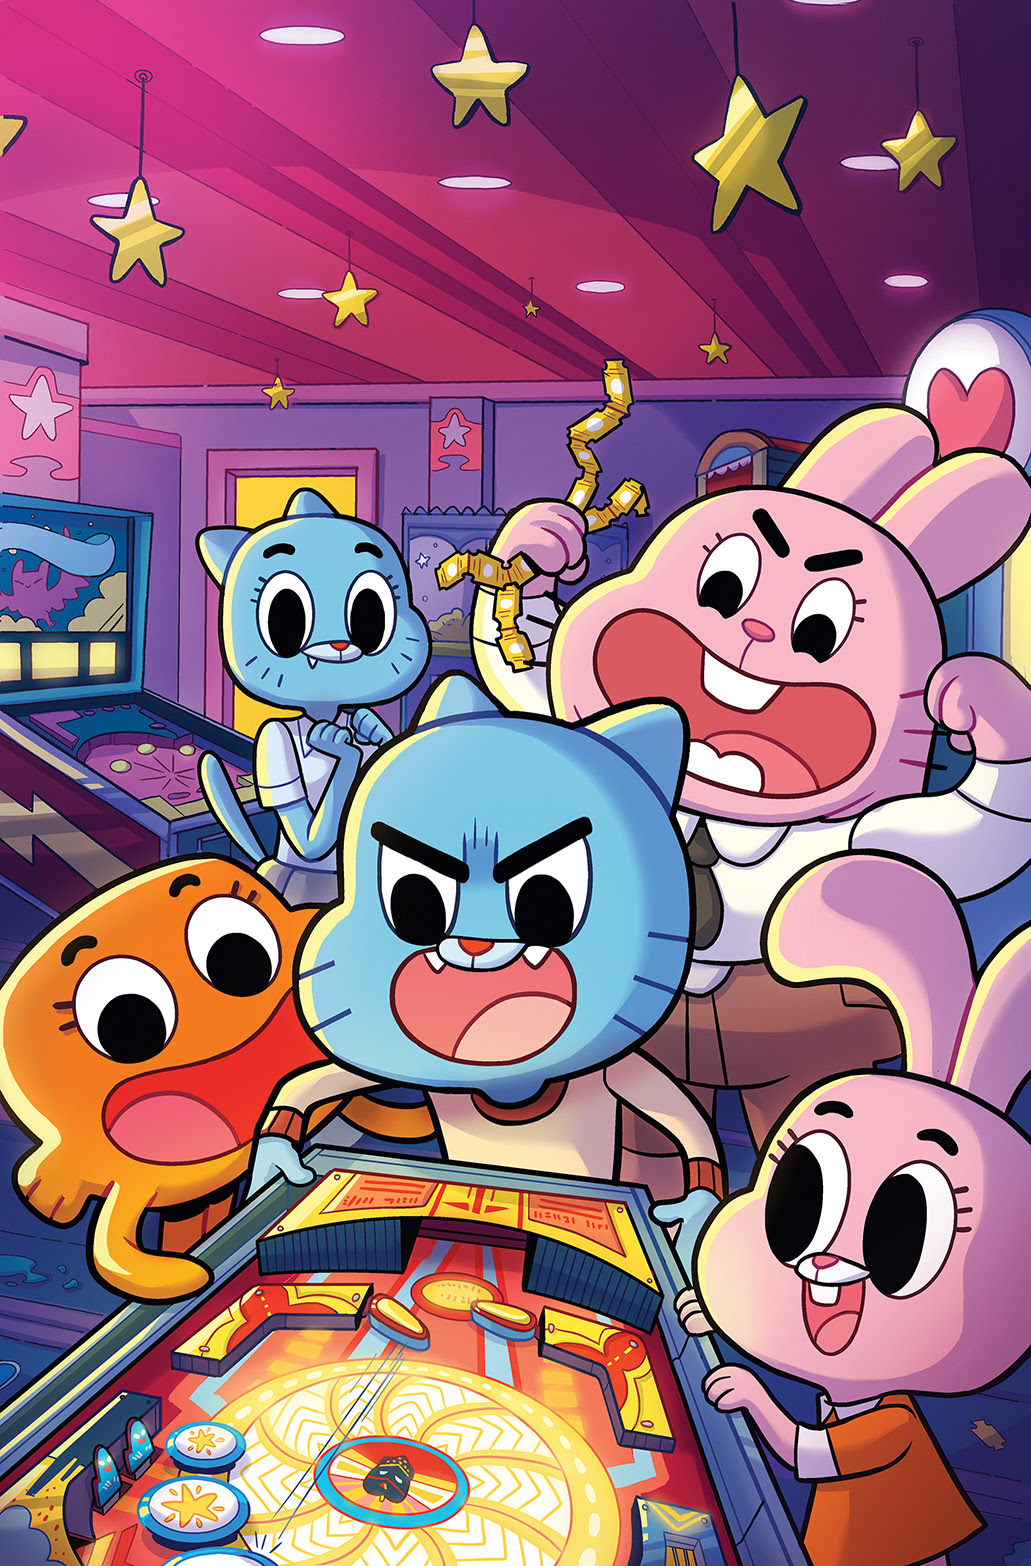 THE AMAZING WORLD OF GUMBALL #1 Cover C by Paulina Ganucheau